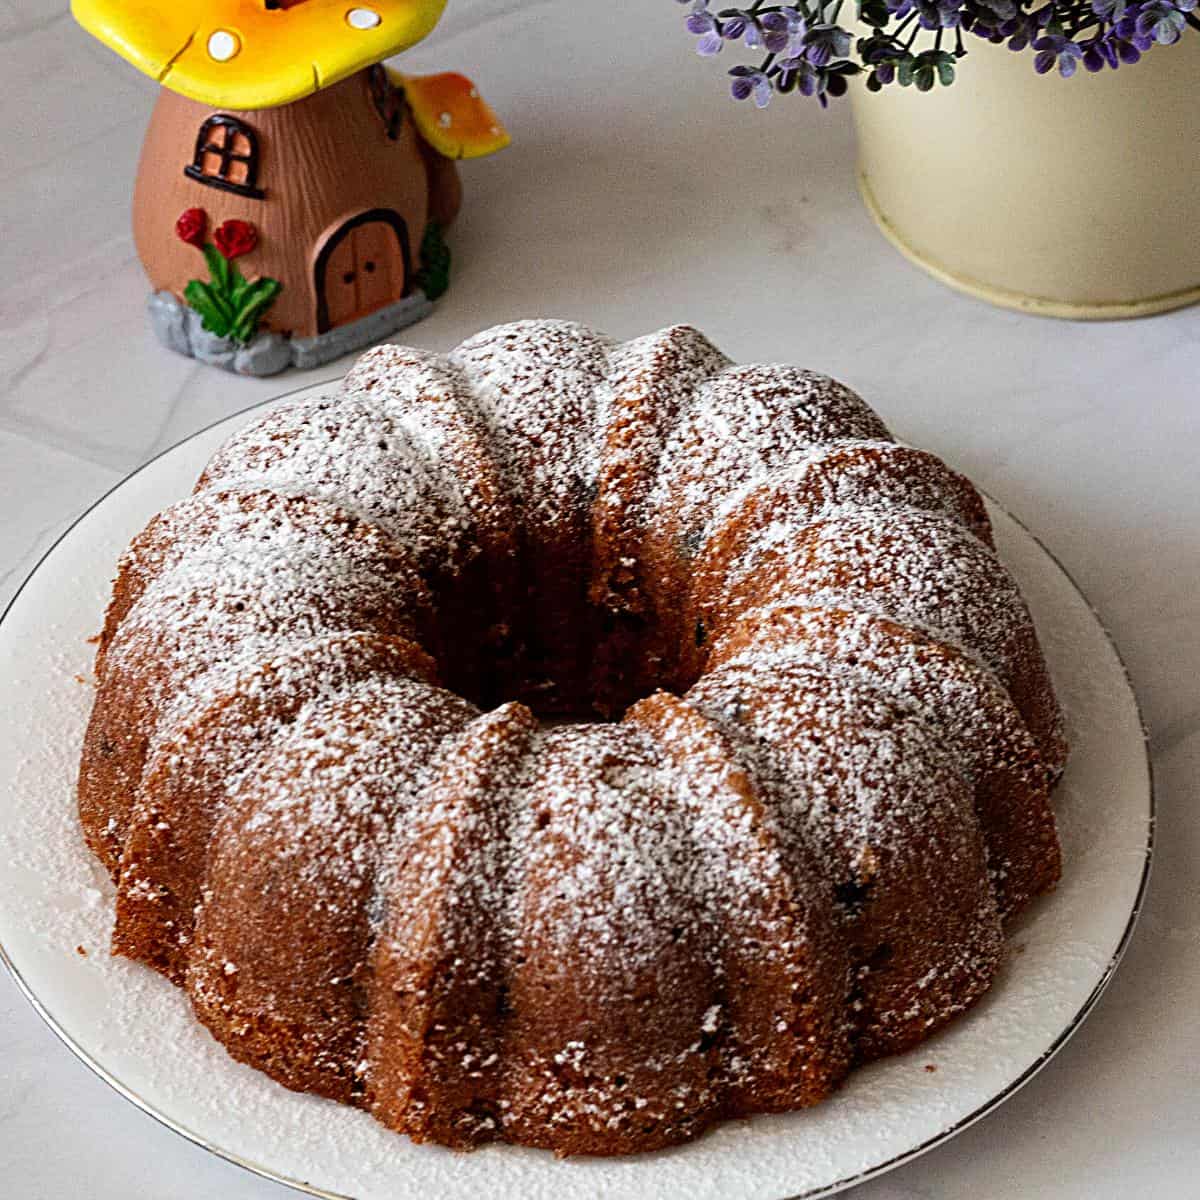 Bundt cake dusted with powdered sugar on the plate.